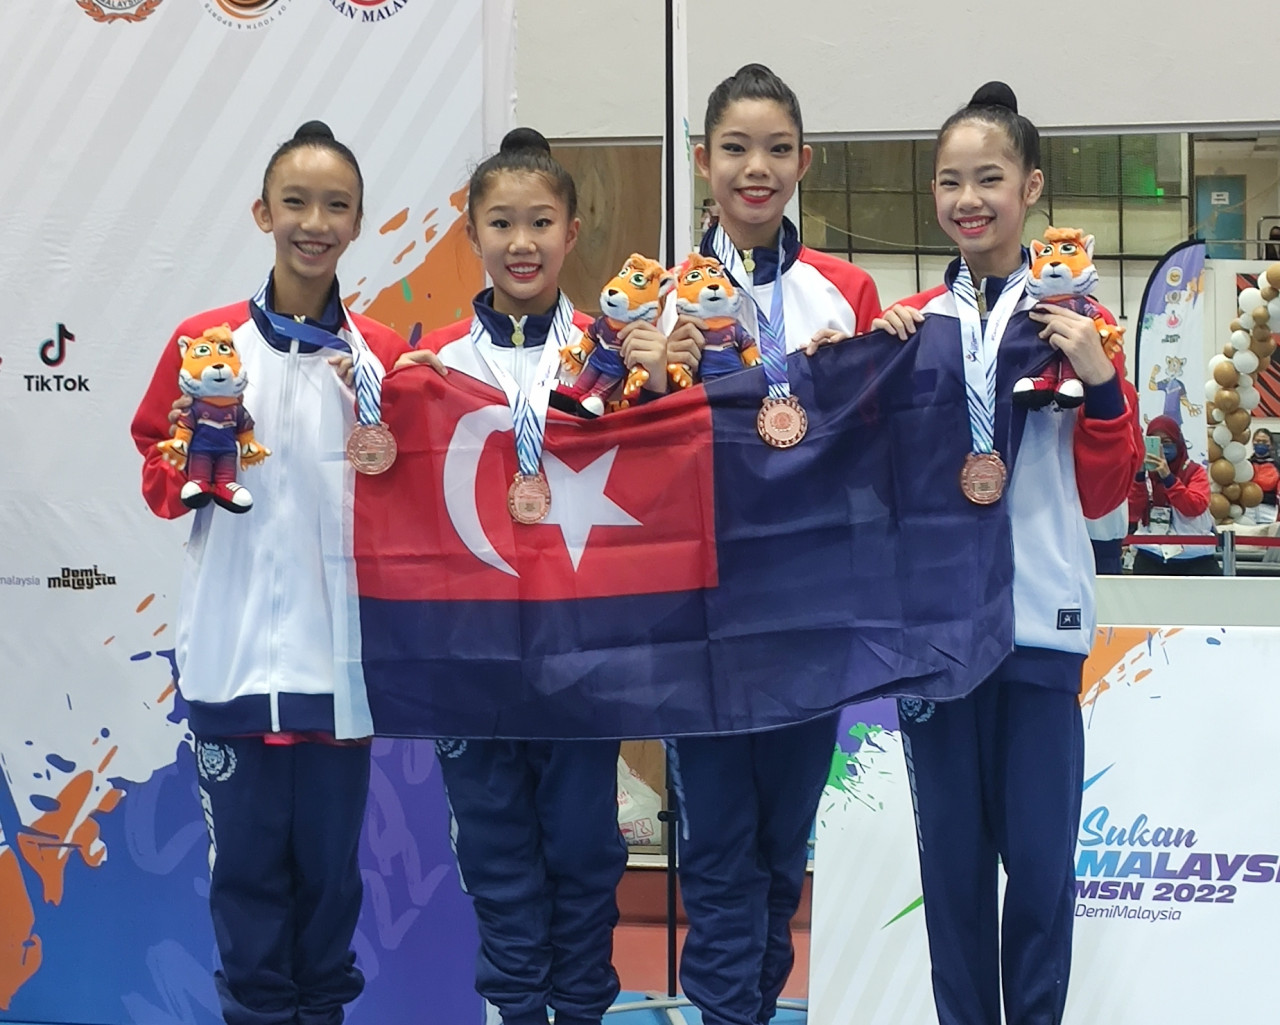 Eva Goh Hann Ning (second from left) with her rhythmic gymnastics team’s all-around bronze medal after her debut at the 2022 Malaysia Games held in September in Bukit Jalil. – Pic courtesy of Eva Goh Hann Ning, October 23, 2022